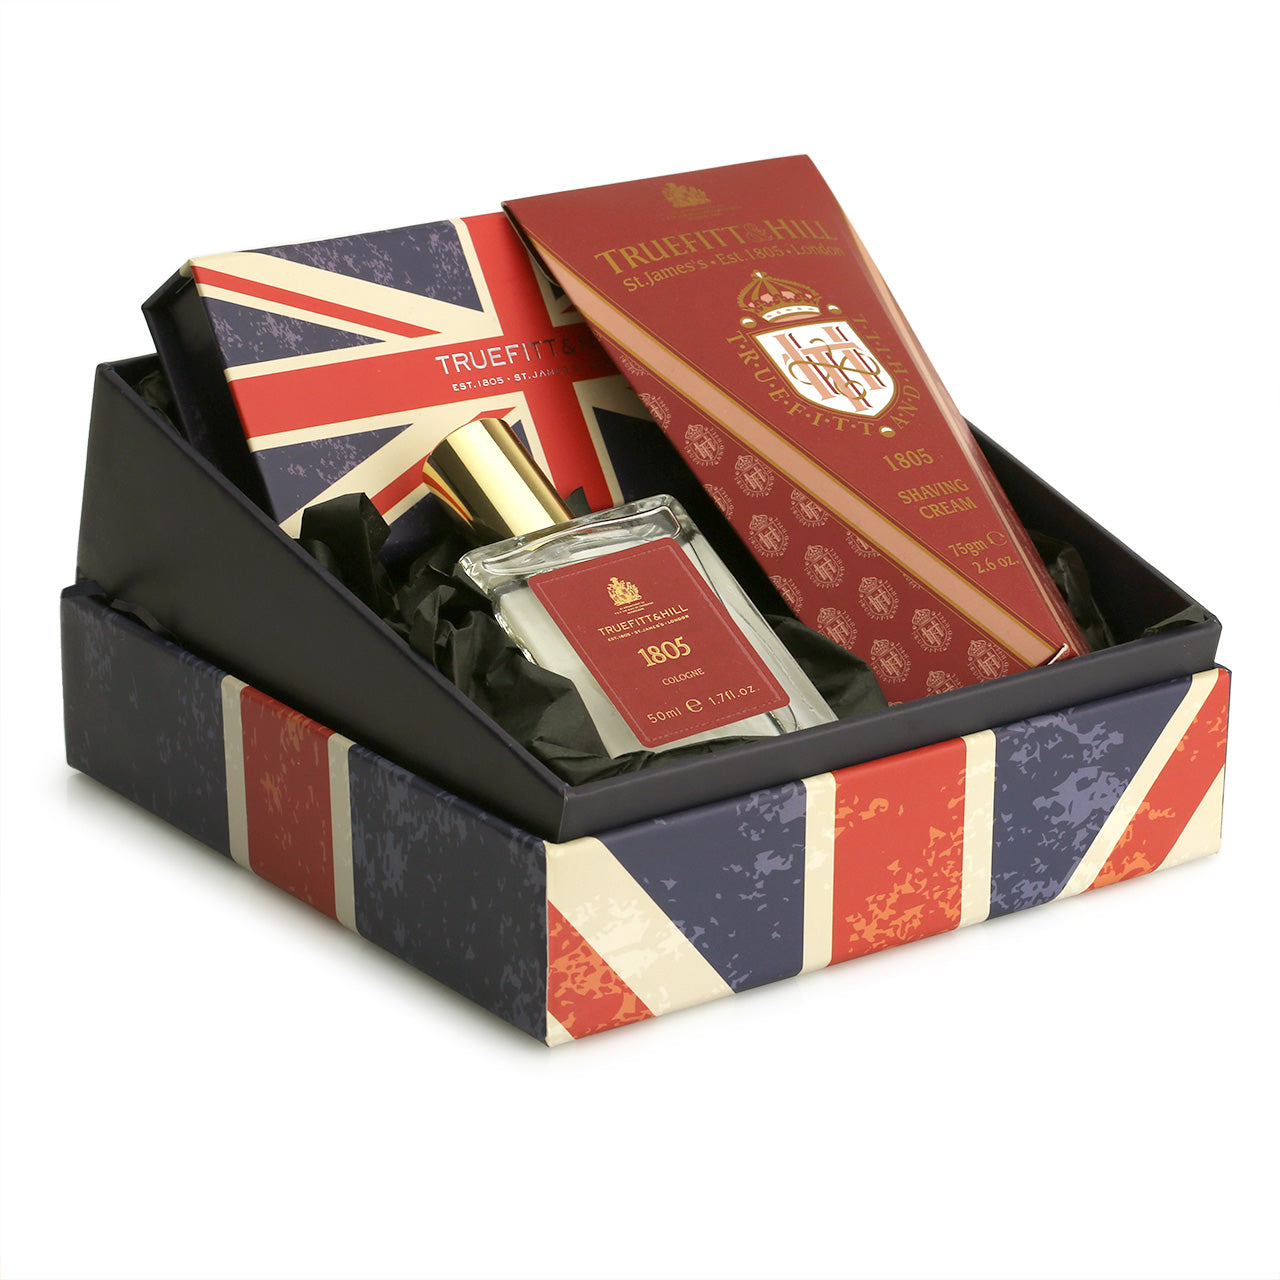 Giftbox covered in the Union-Jack containing 1805 Cologne, 1805 Shaving Cream and the Truefitt & Hill Keyring